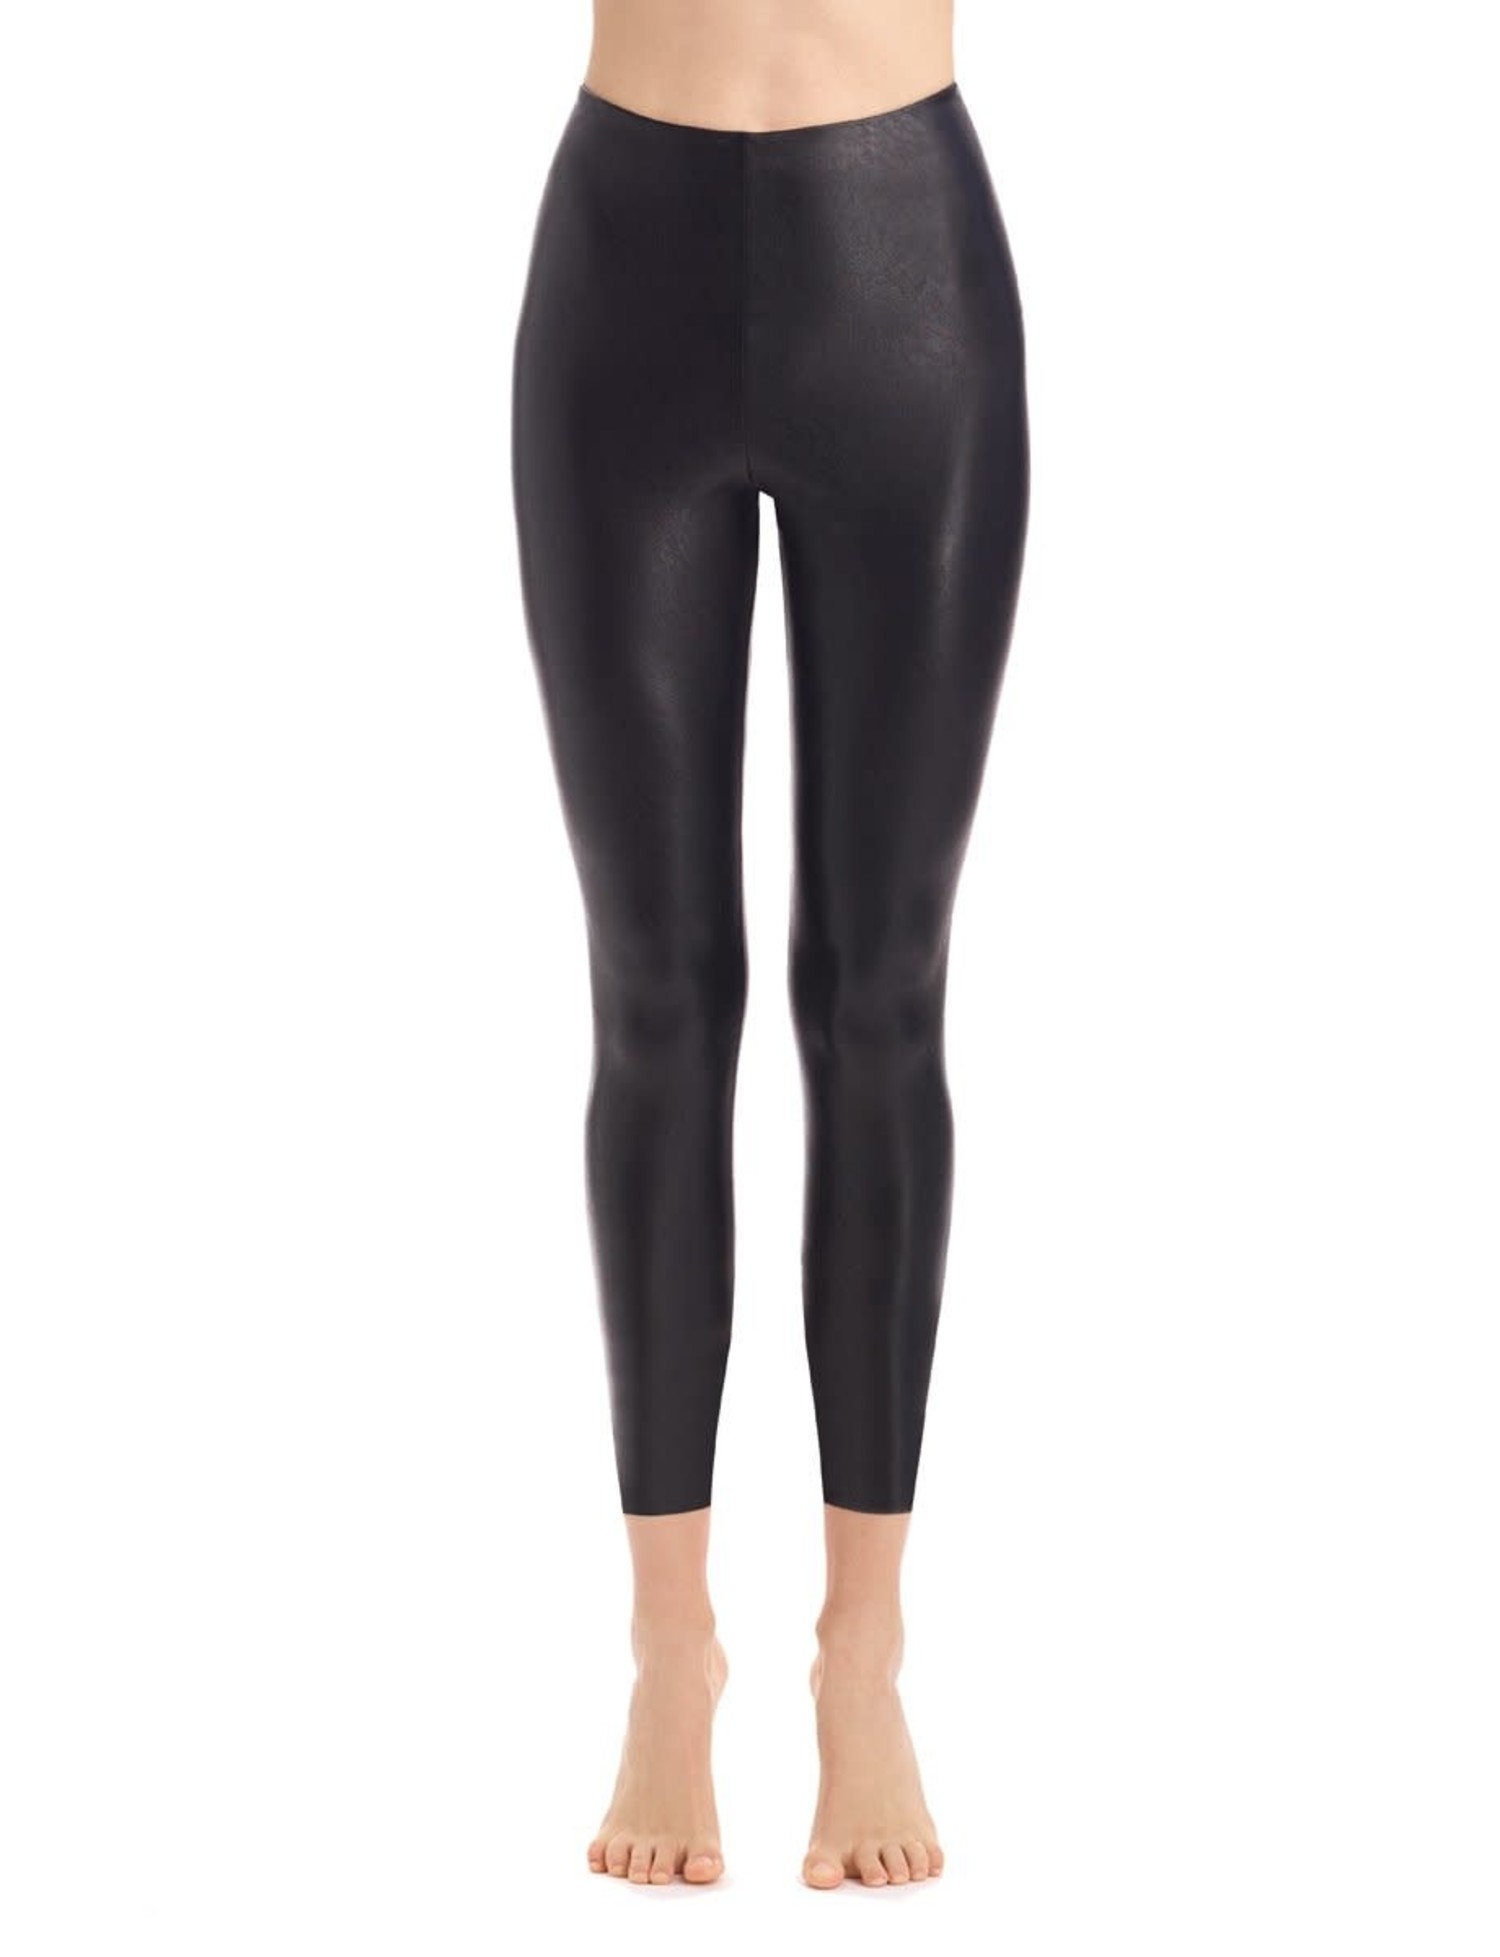 Commando 7/8 Faux Leather Leggings with Perfect Control